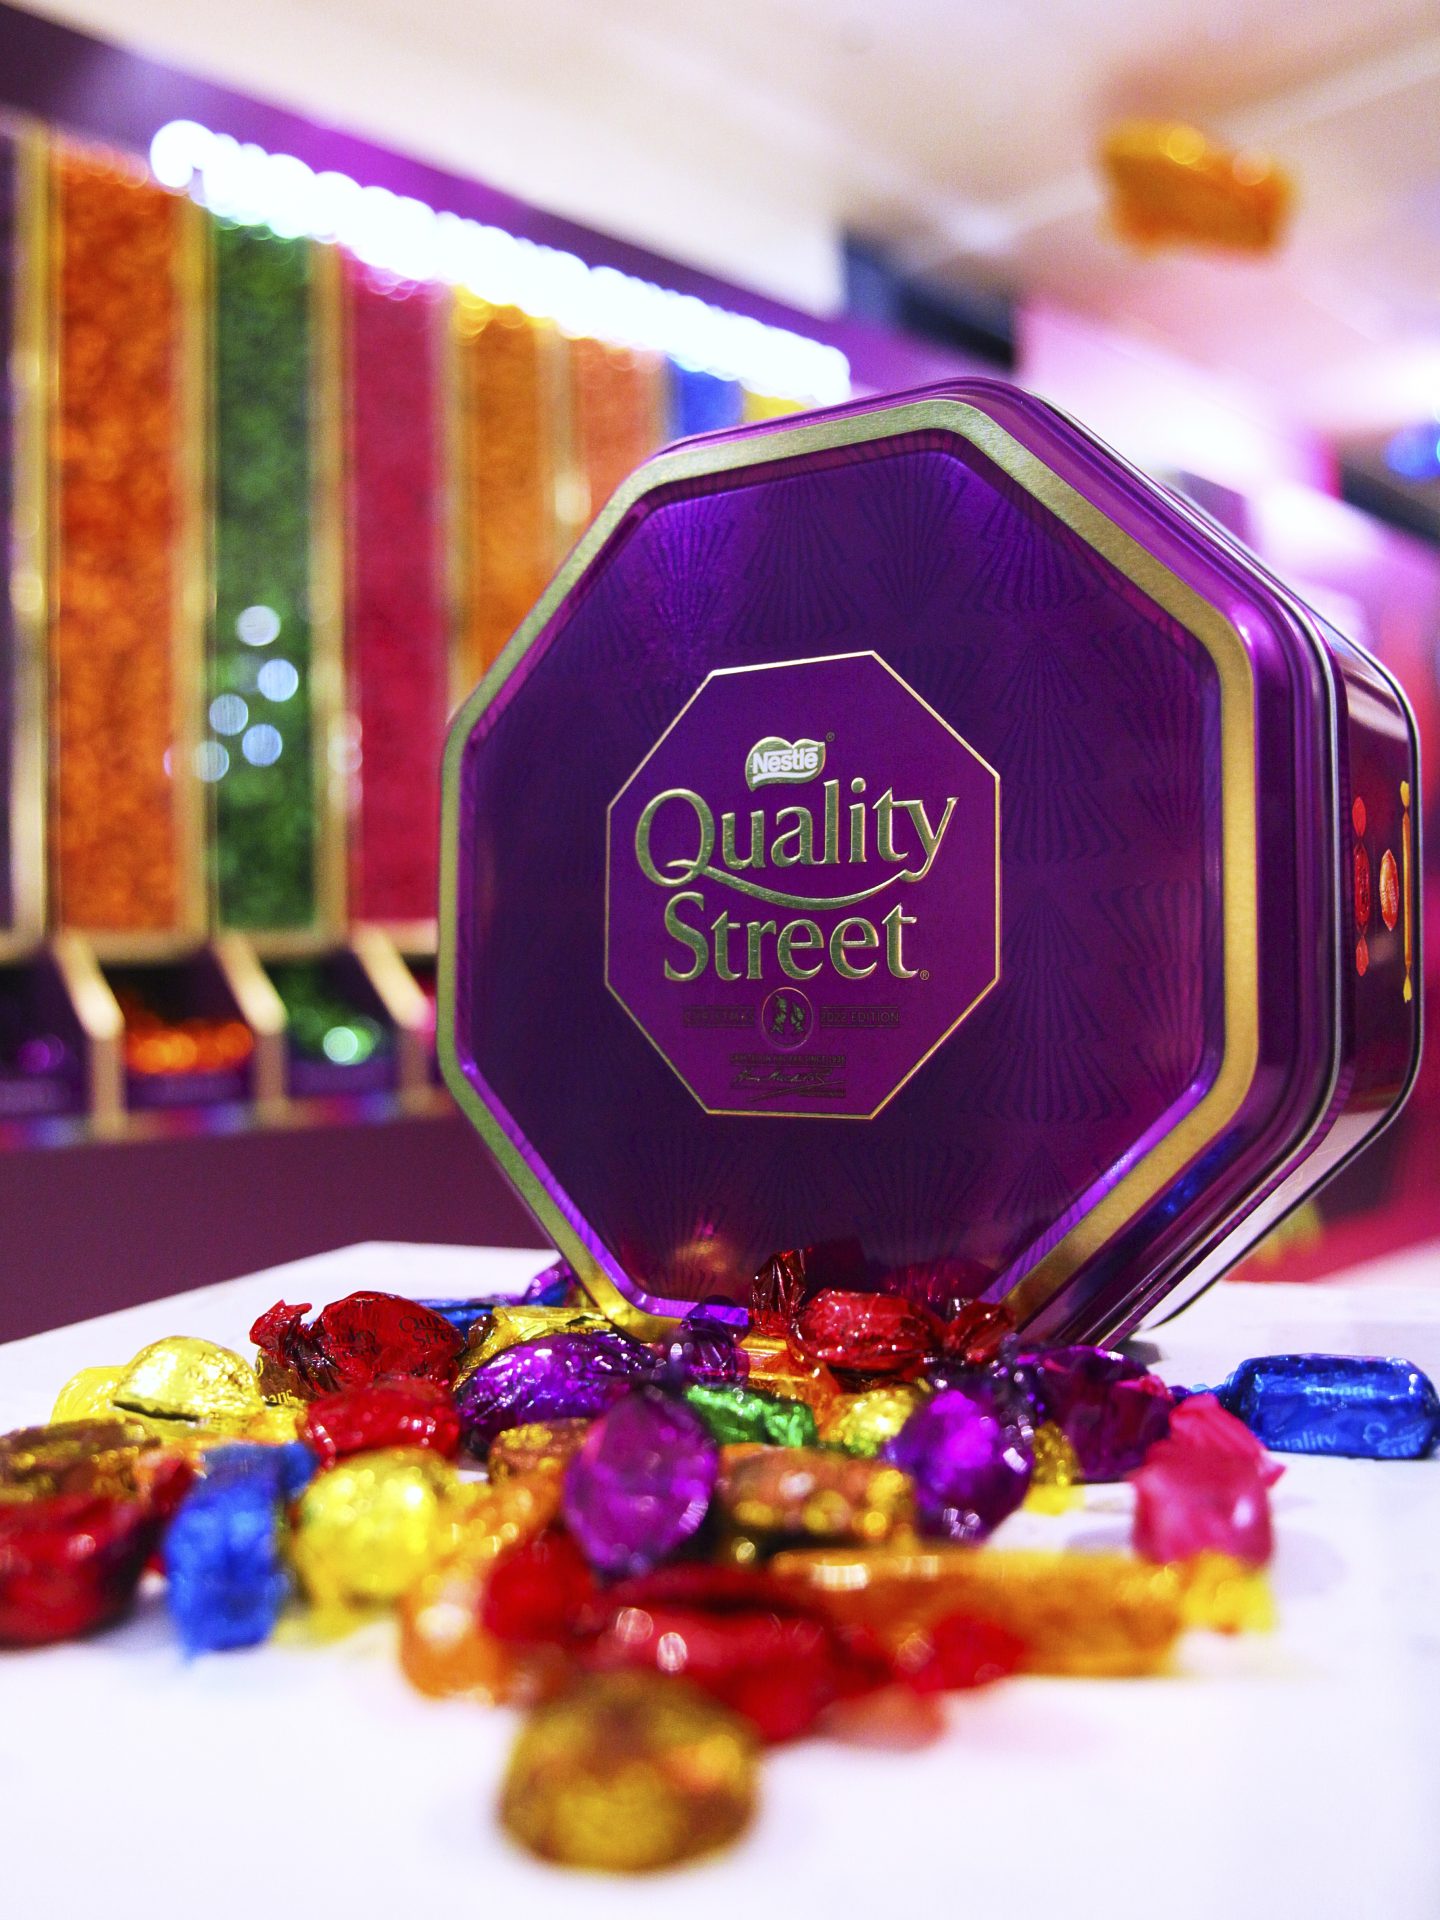 Customise Your Quality Street Tin With John Lewis